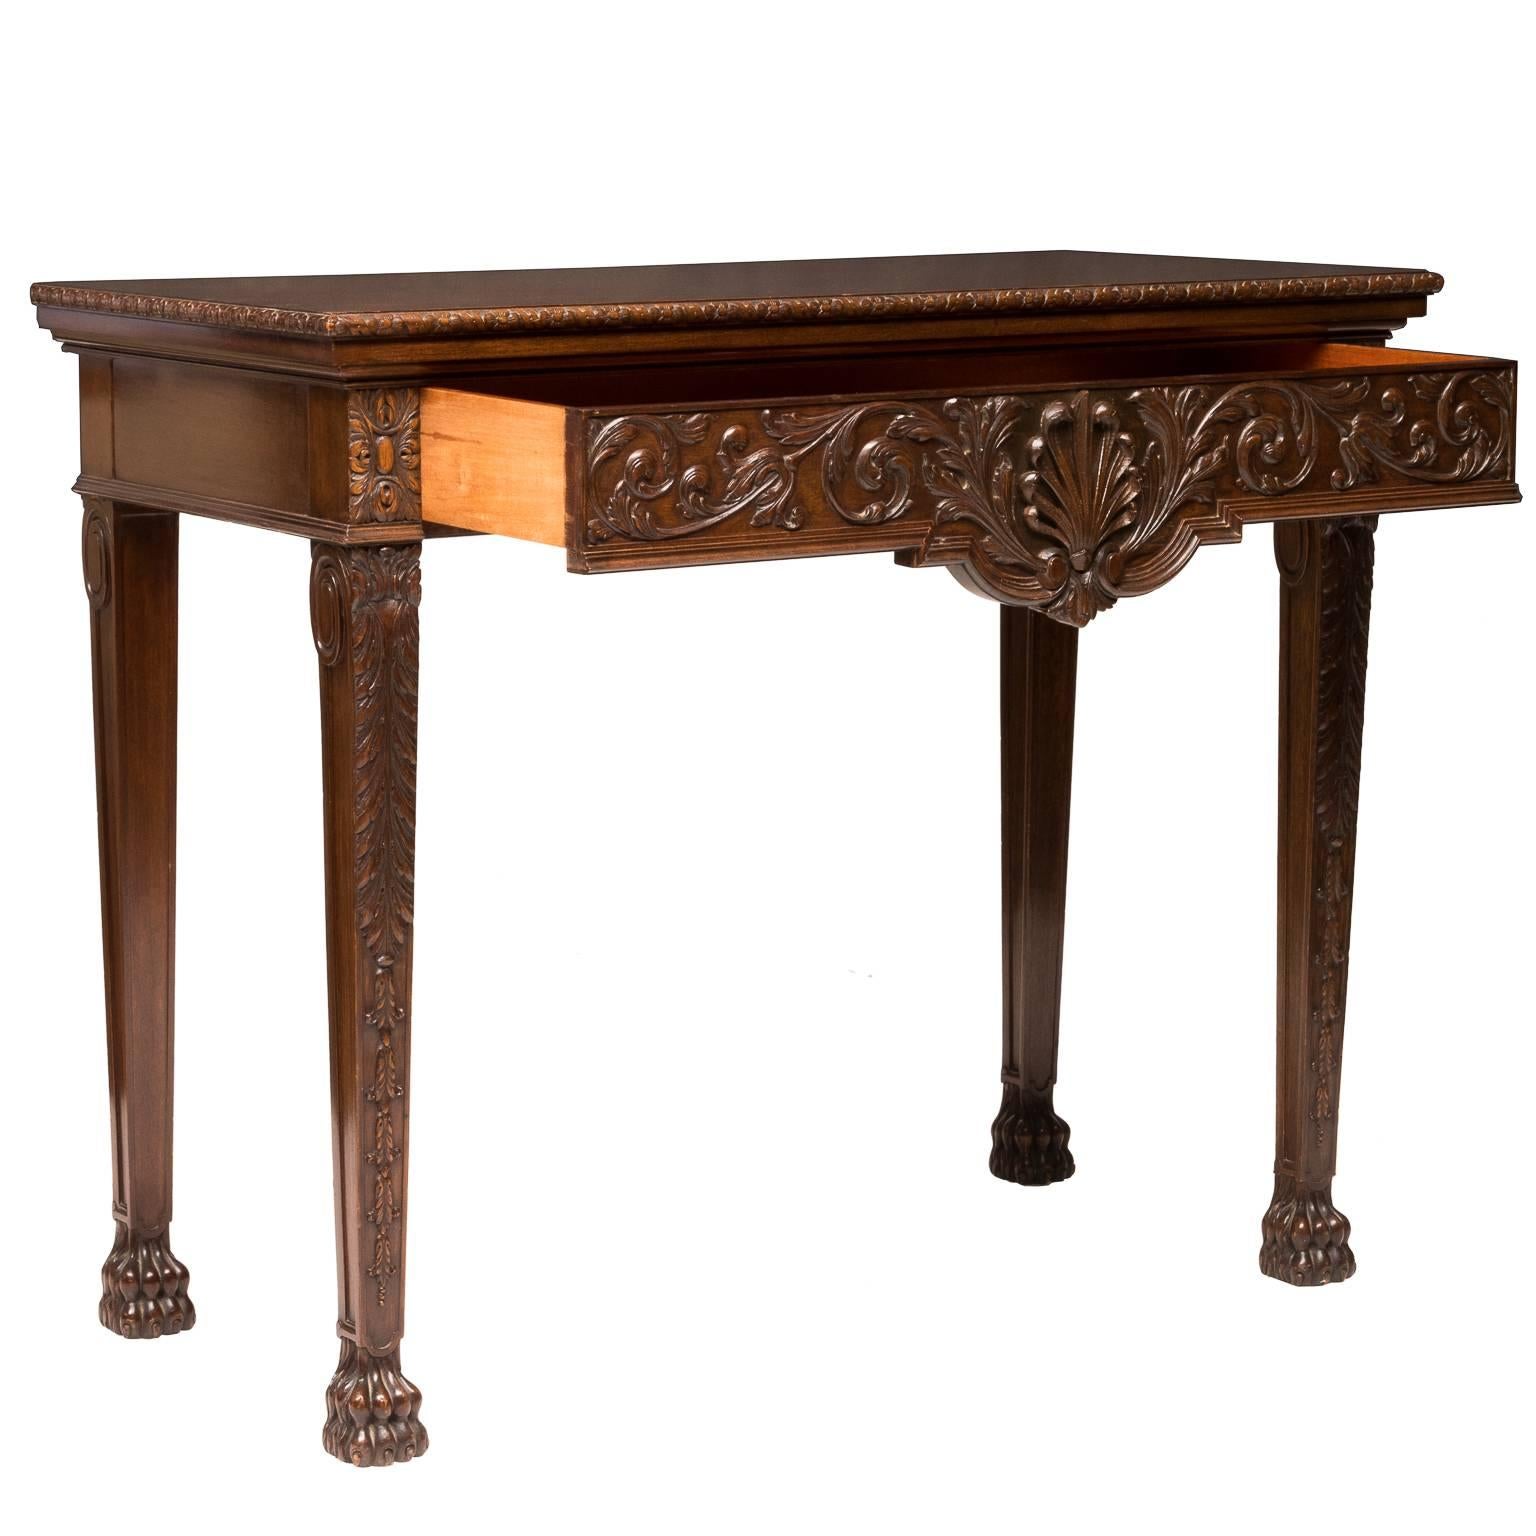 A 19th century William & Kent style console made from mahogany wood. Very detailed carvings, shells, leaf and vine, acanthus leaf, bell flowers and fine detailed claw feet. There is a single large drawer (dovetailed). Beautiful ribbon cut figured